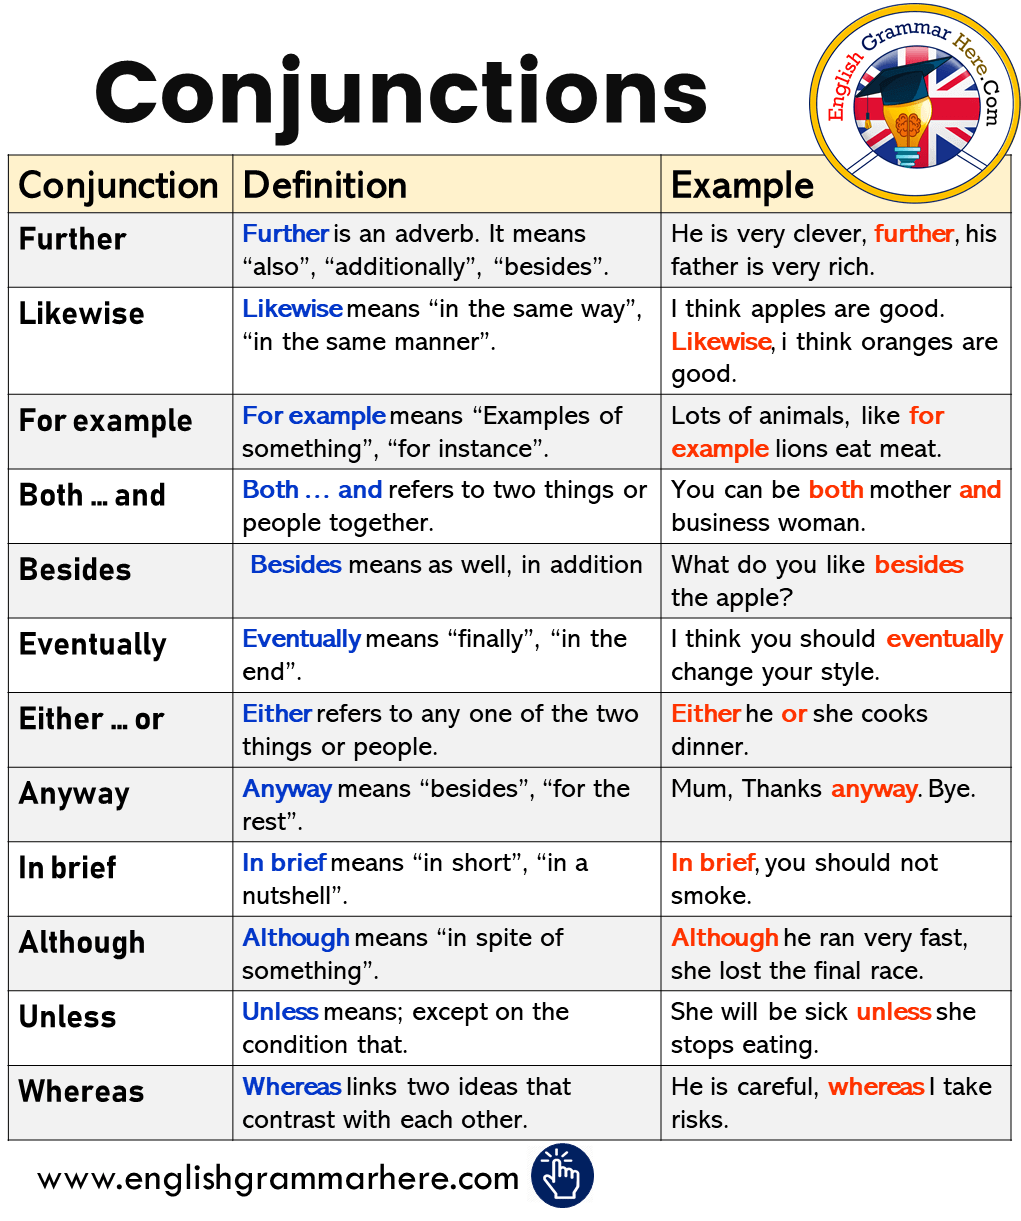 Conjunctions, Definitions and Example Sentences